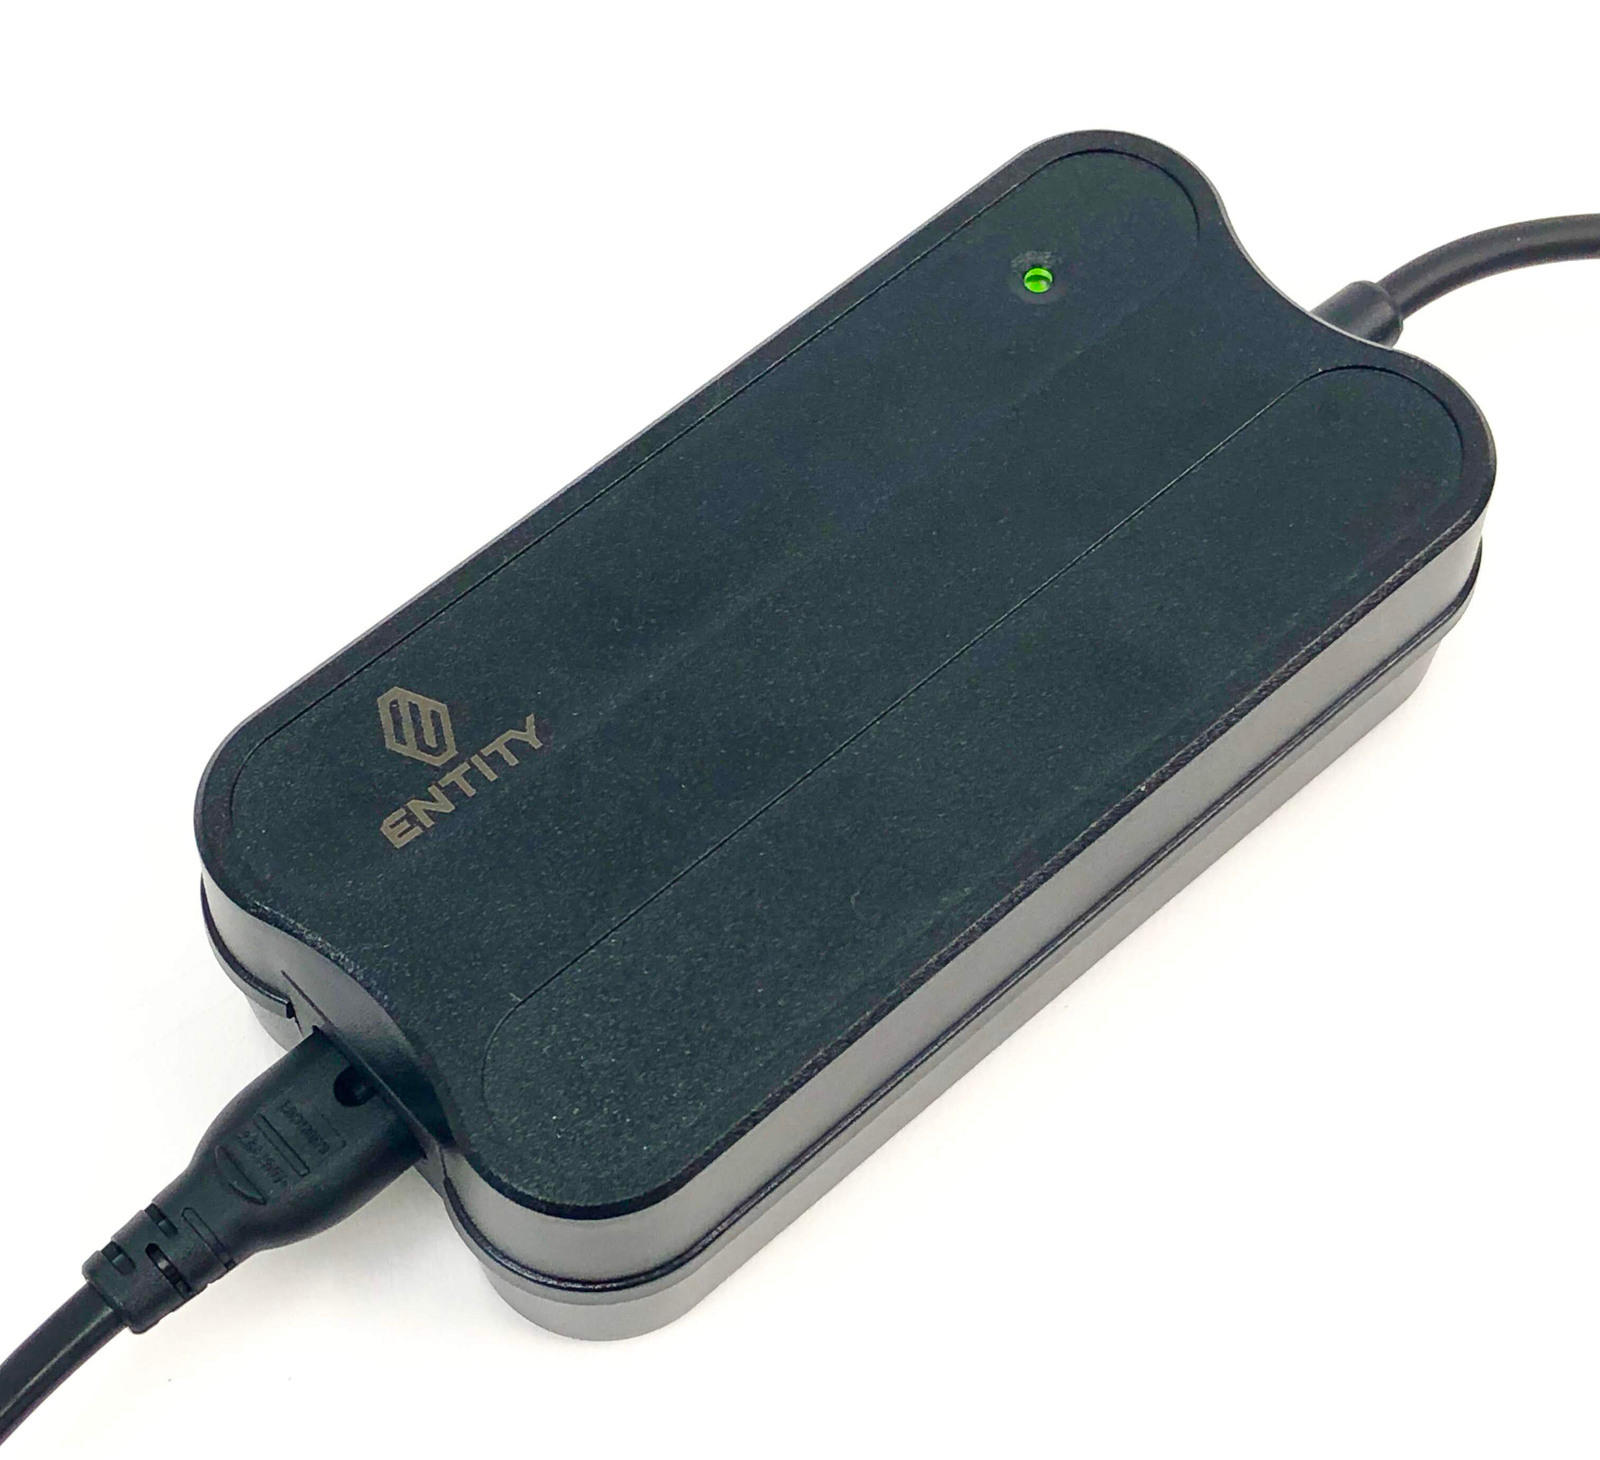 Entity Ultimo EBC-200 Battery Safety Charger